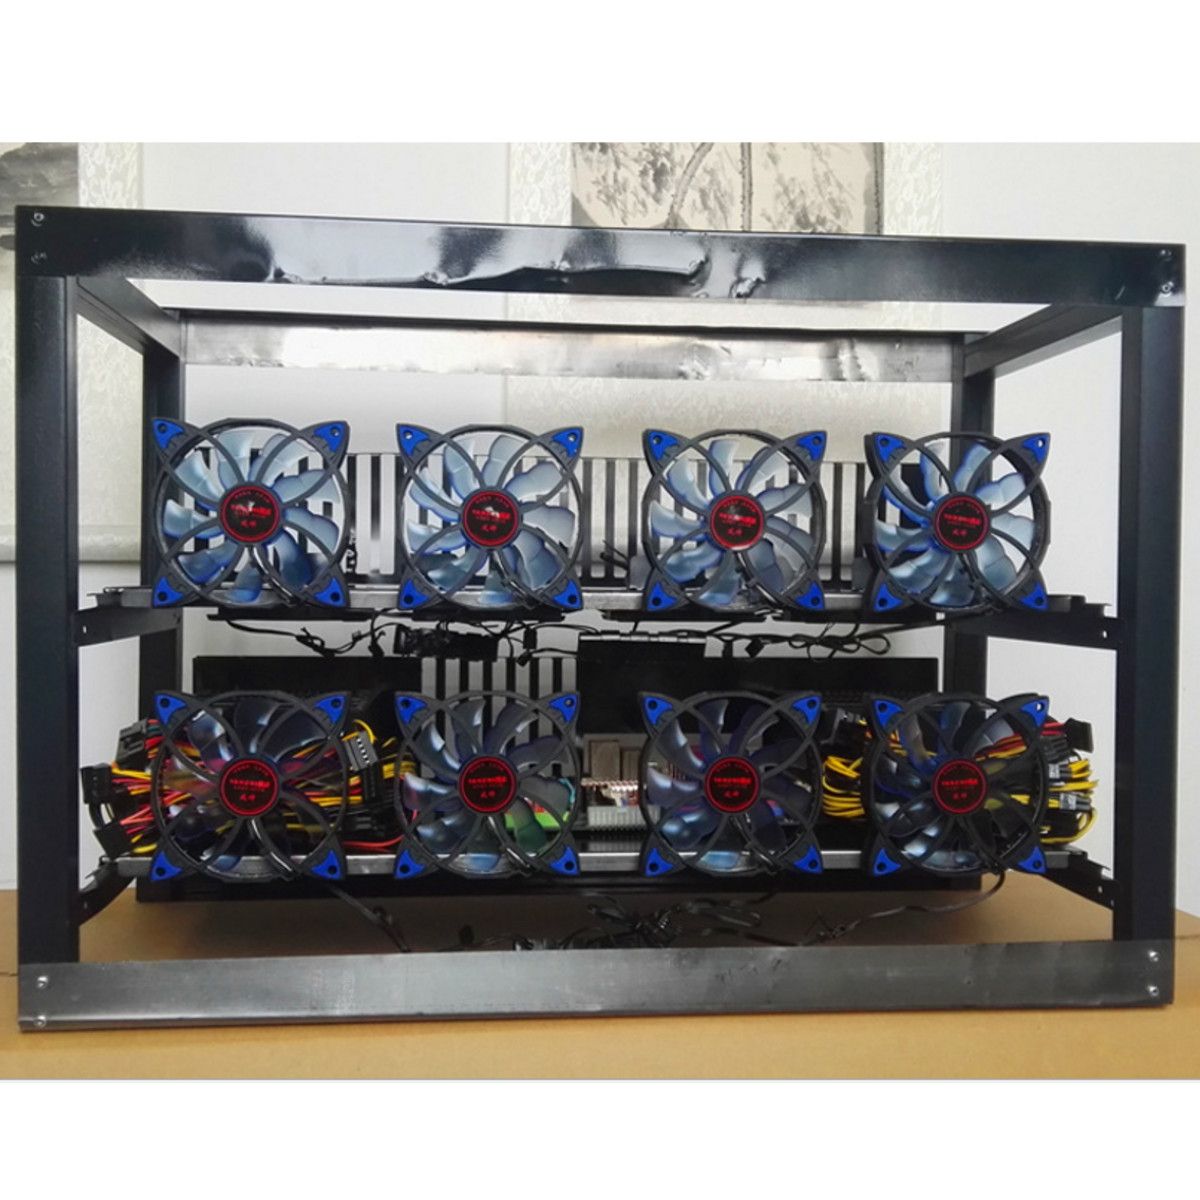 Aluminum-Crypto-Open-Air-Mining-Miner-Frame-Rig-Case-For-8-GPU-Ethereum-12-Fan-1205663